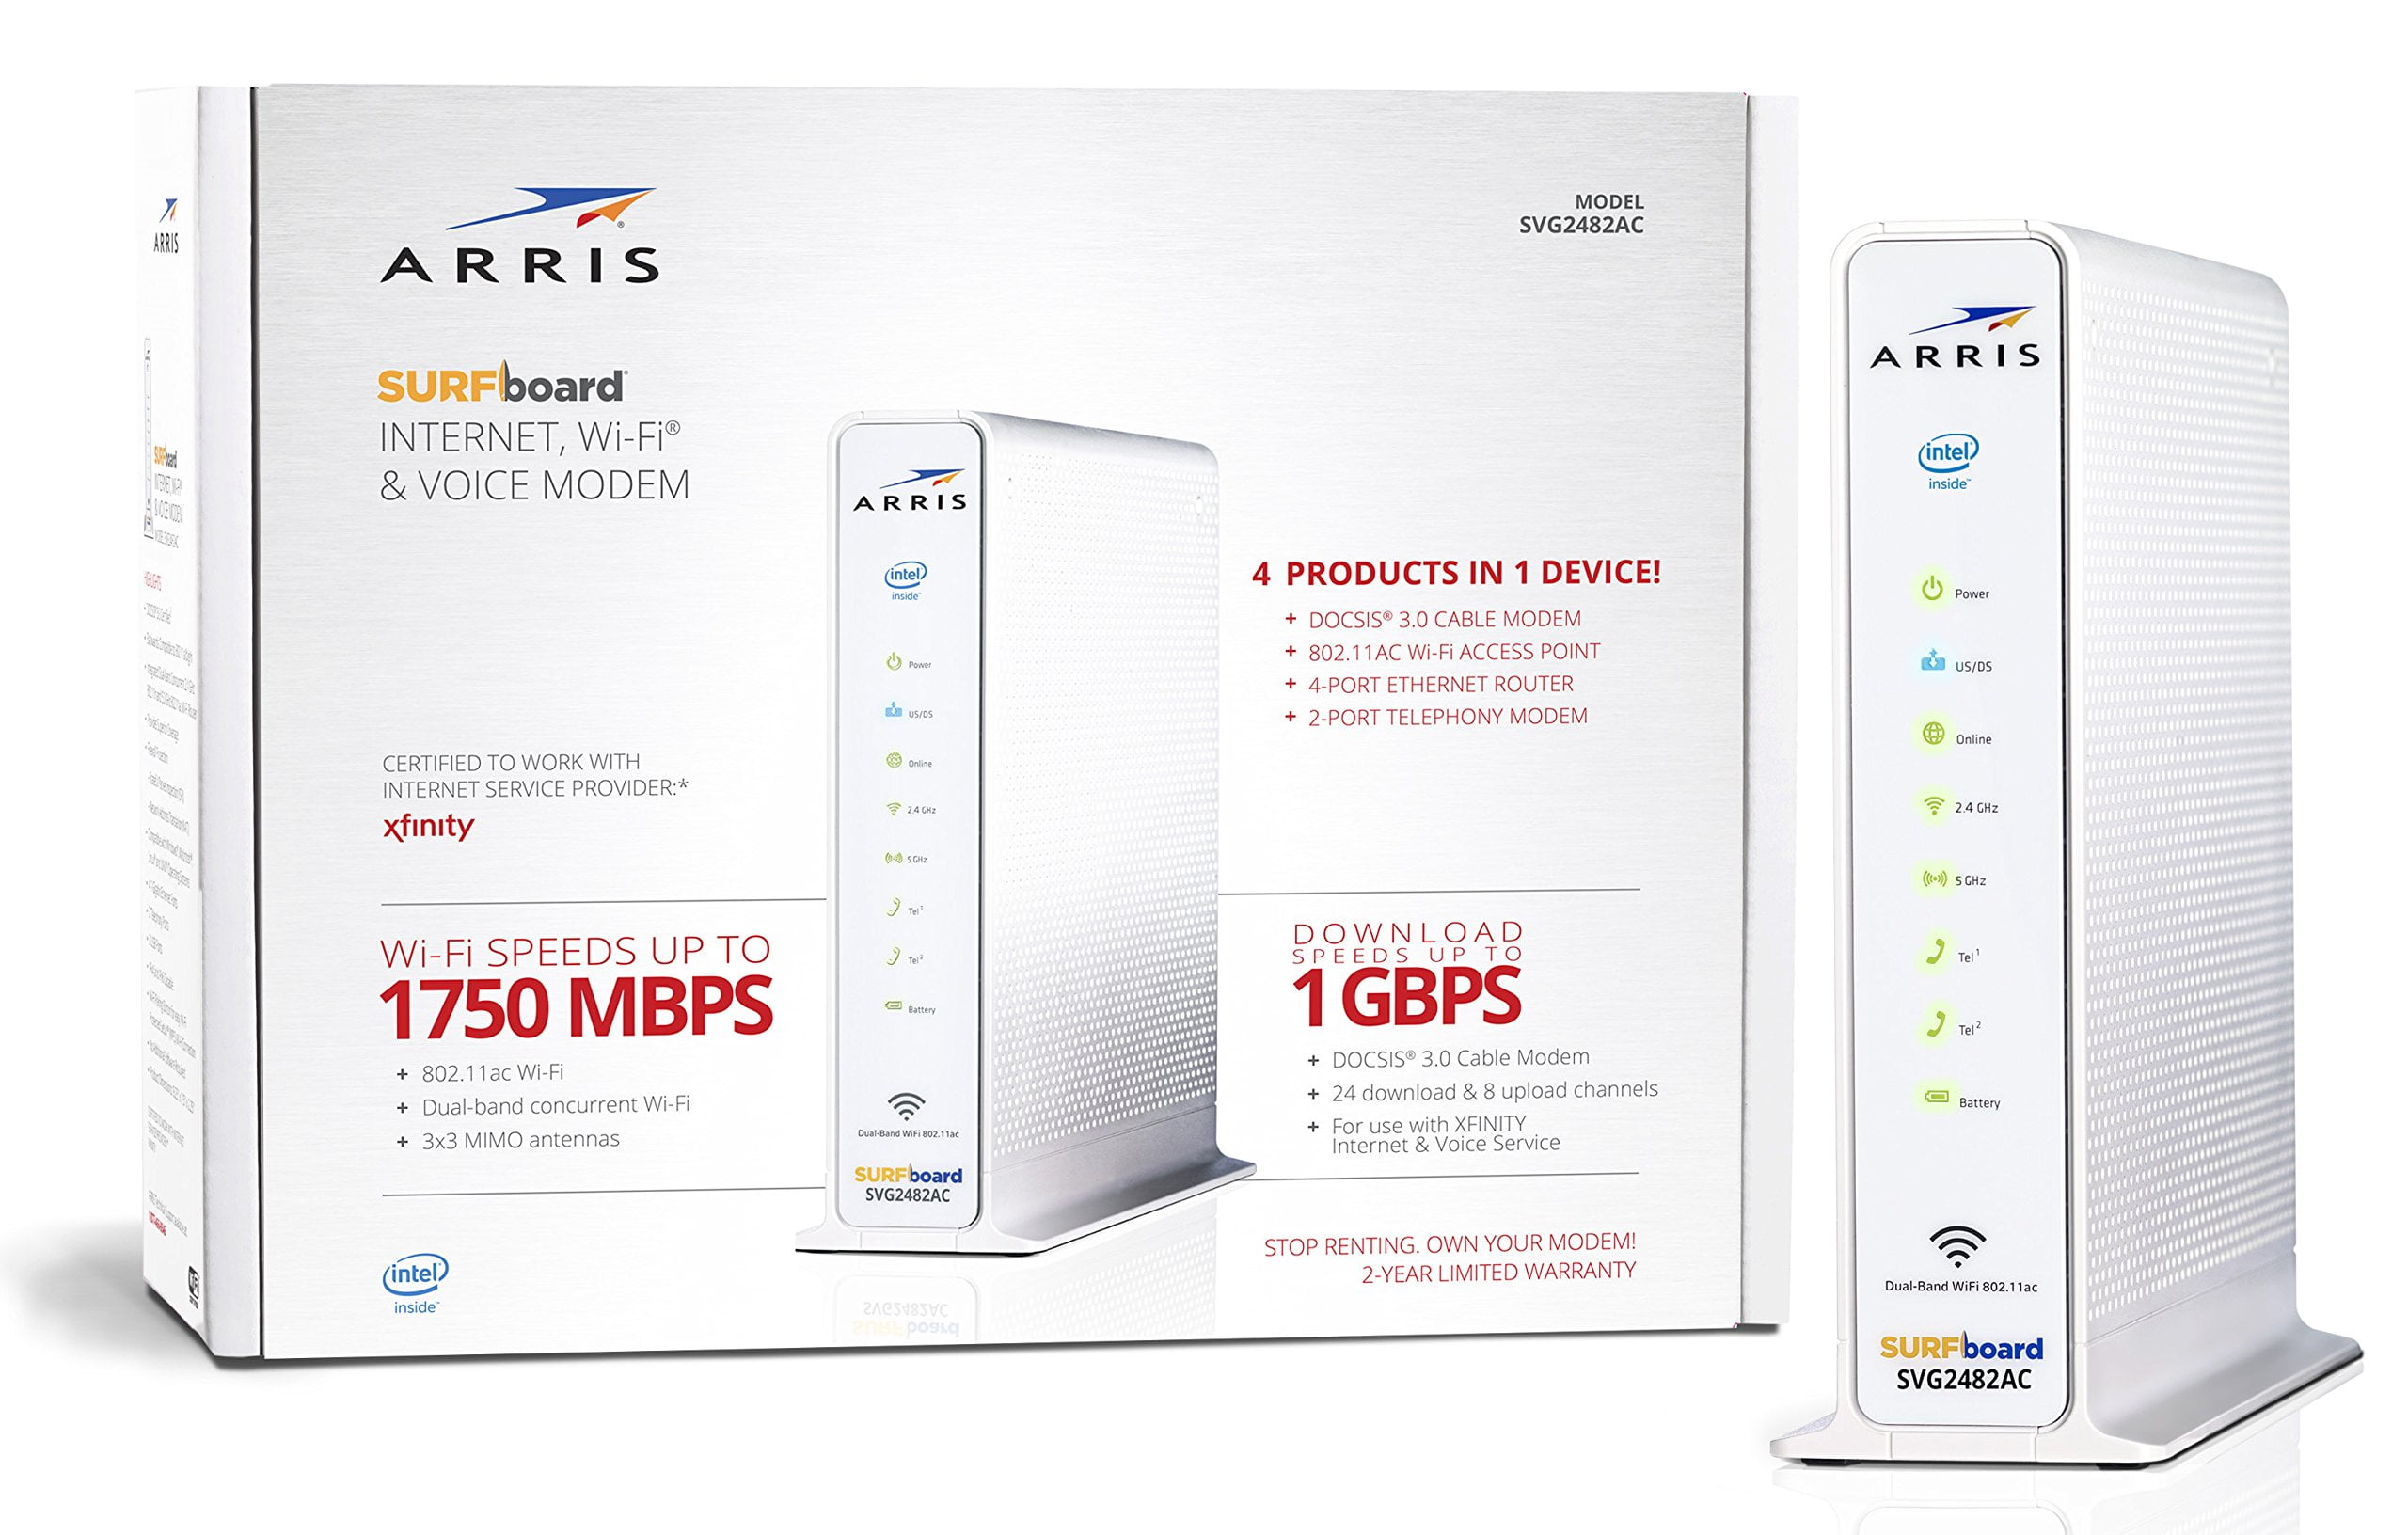 ARRIS Surfboard (24x8) DOCSIS 3.0 Cable Modem Plus AC1750 Dual Band Wi-Fi  Router and Xfinity Telephone, 1 Gbps Max Speed, Certified for Comcast 